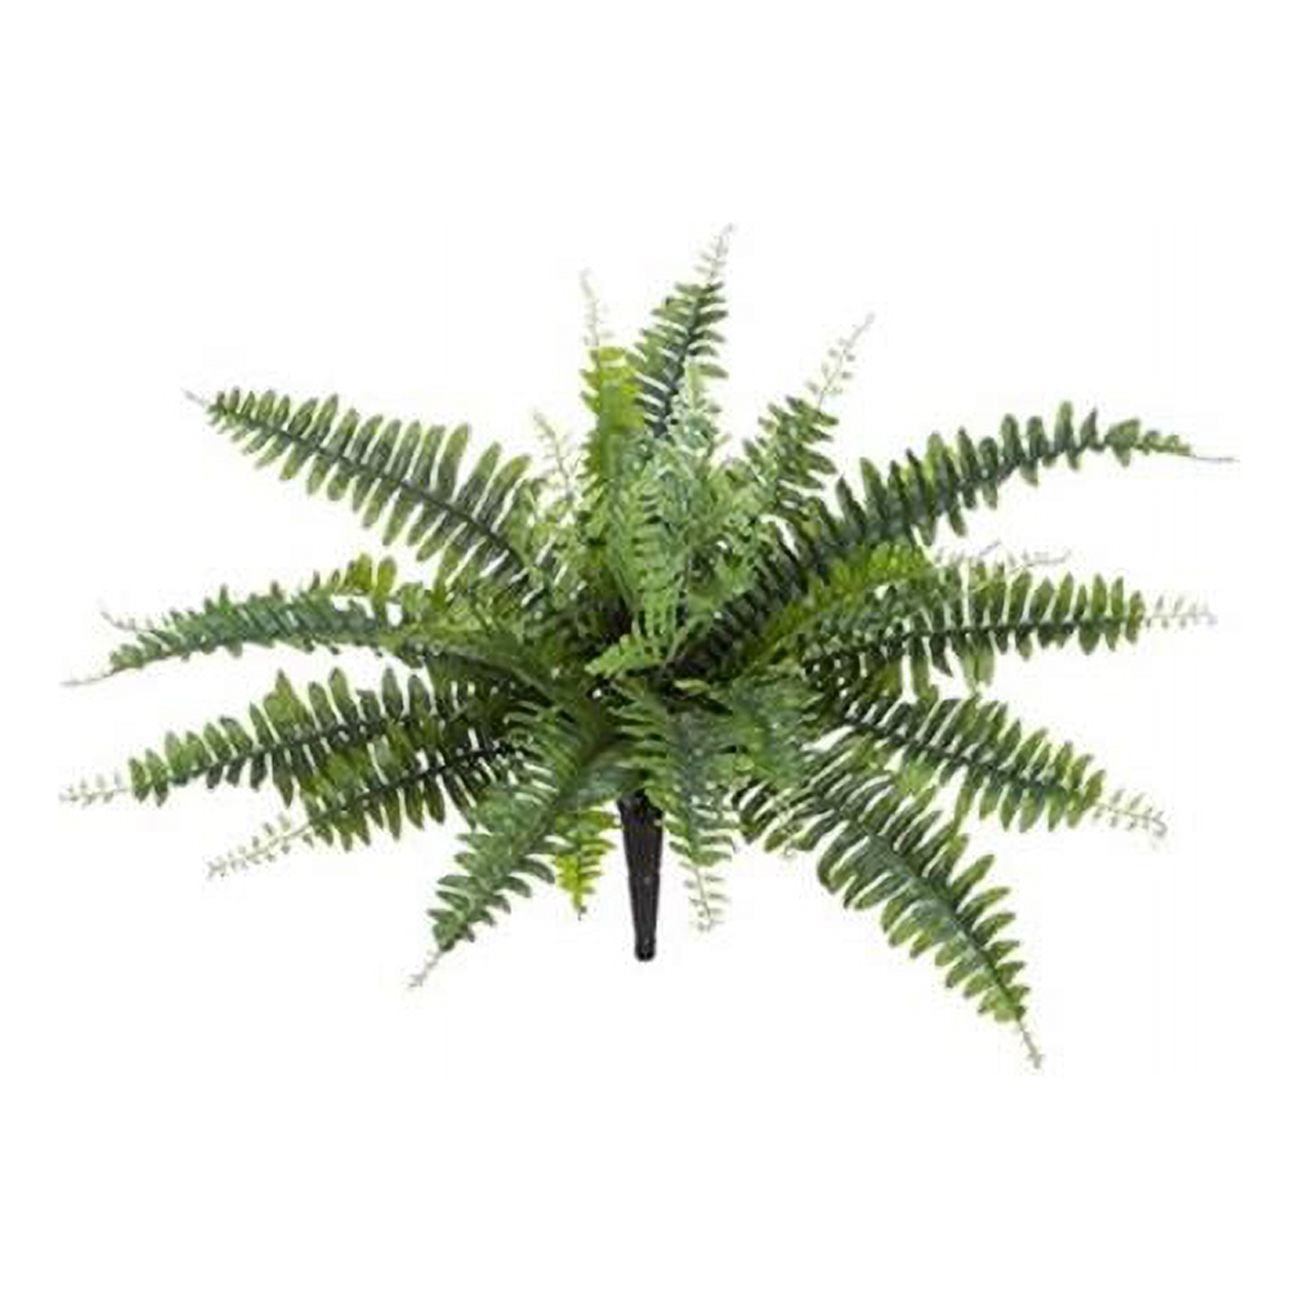 Picture of AllState Floral PBF604-GR 18 in. UV Protected Boston Fern Bush - Green - Pack of 12